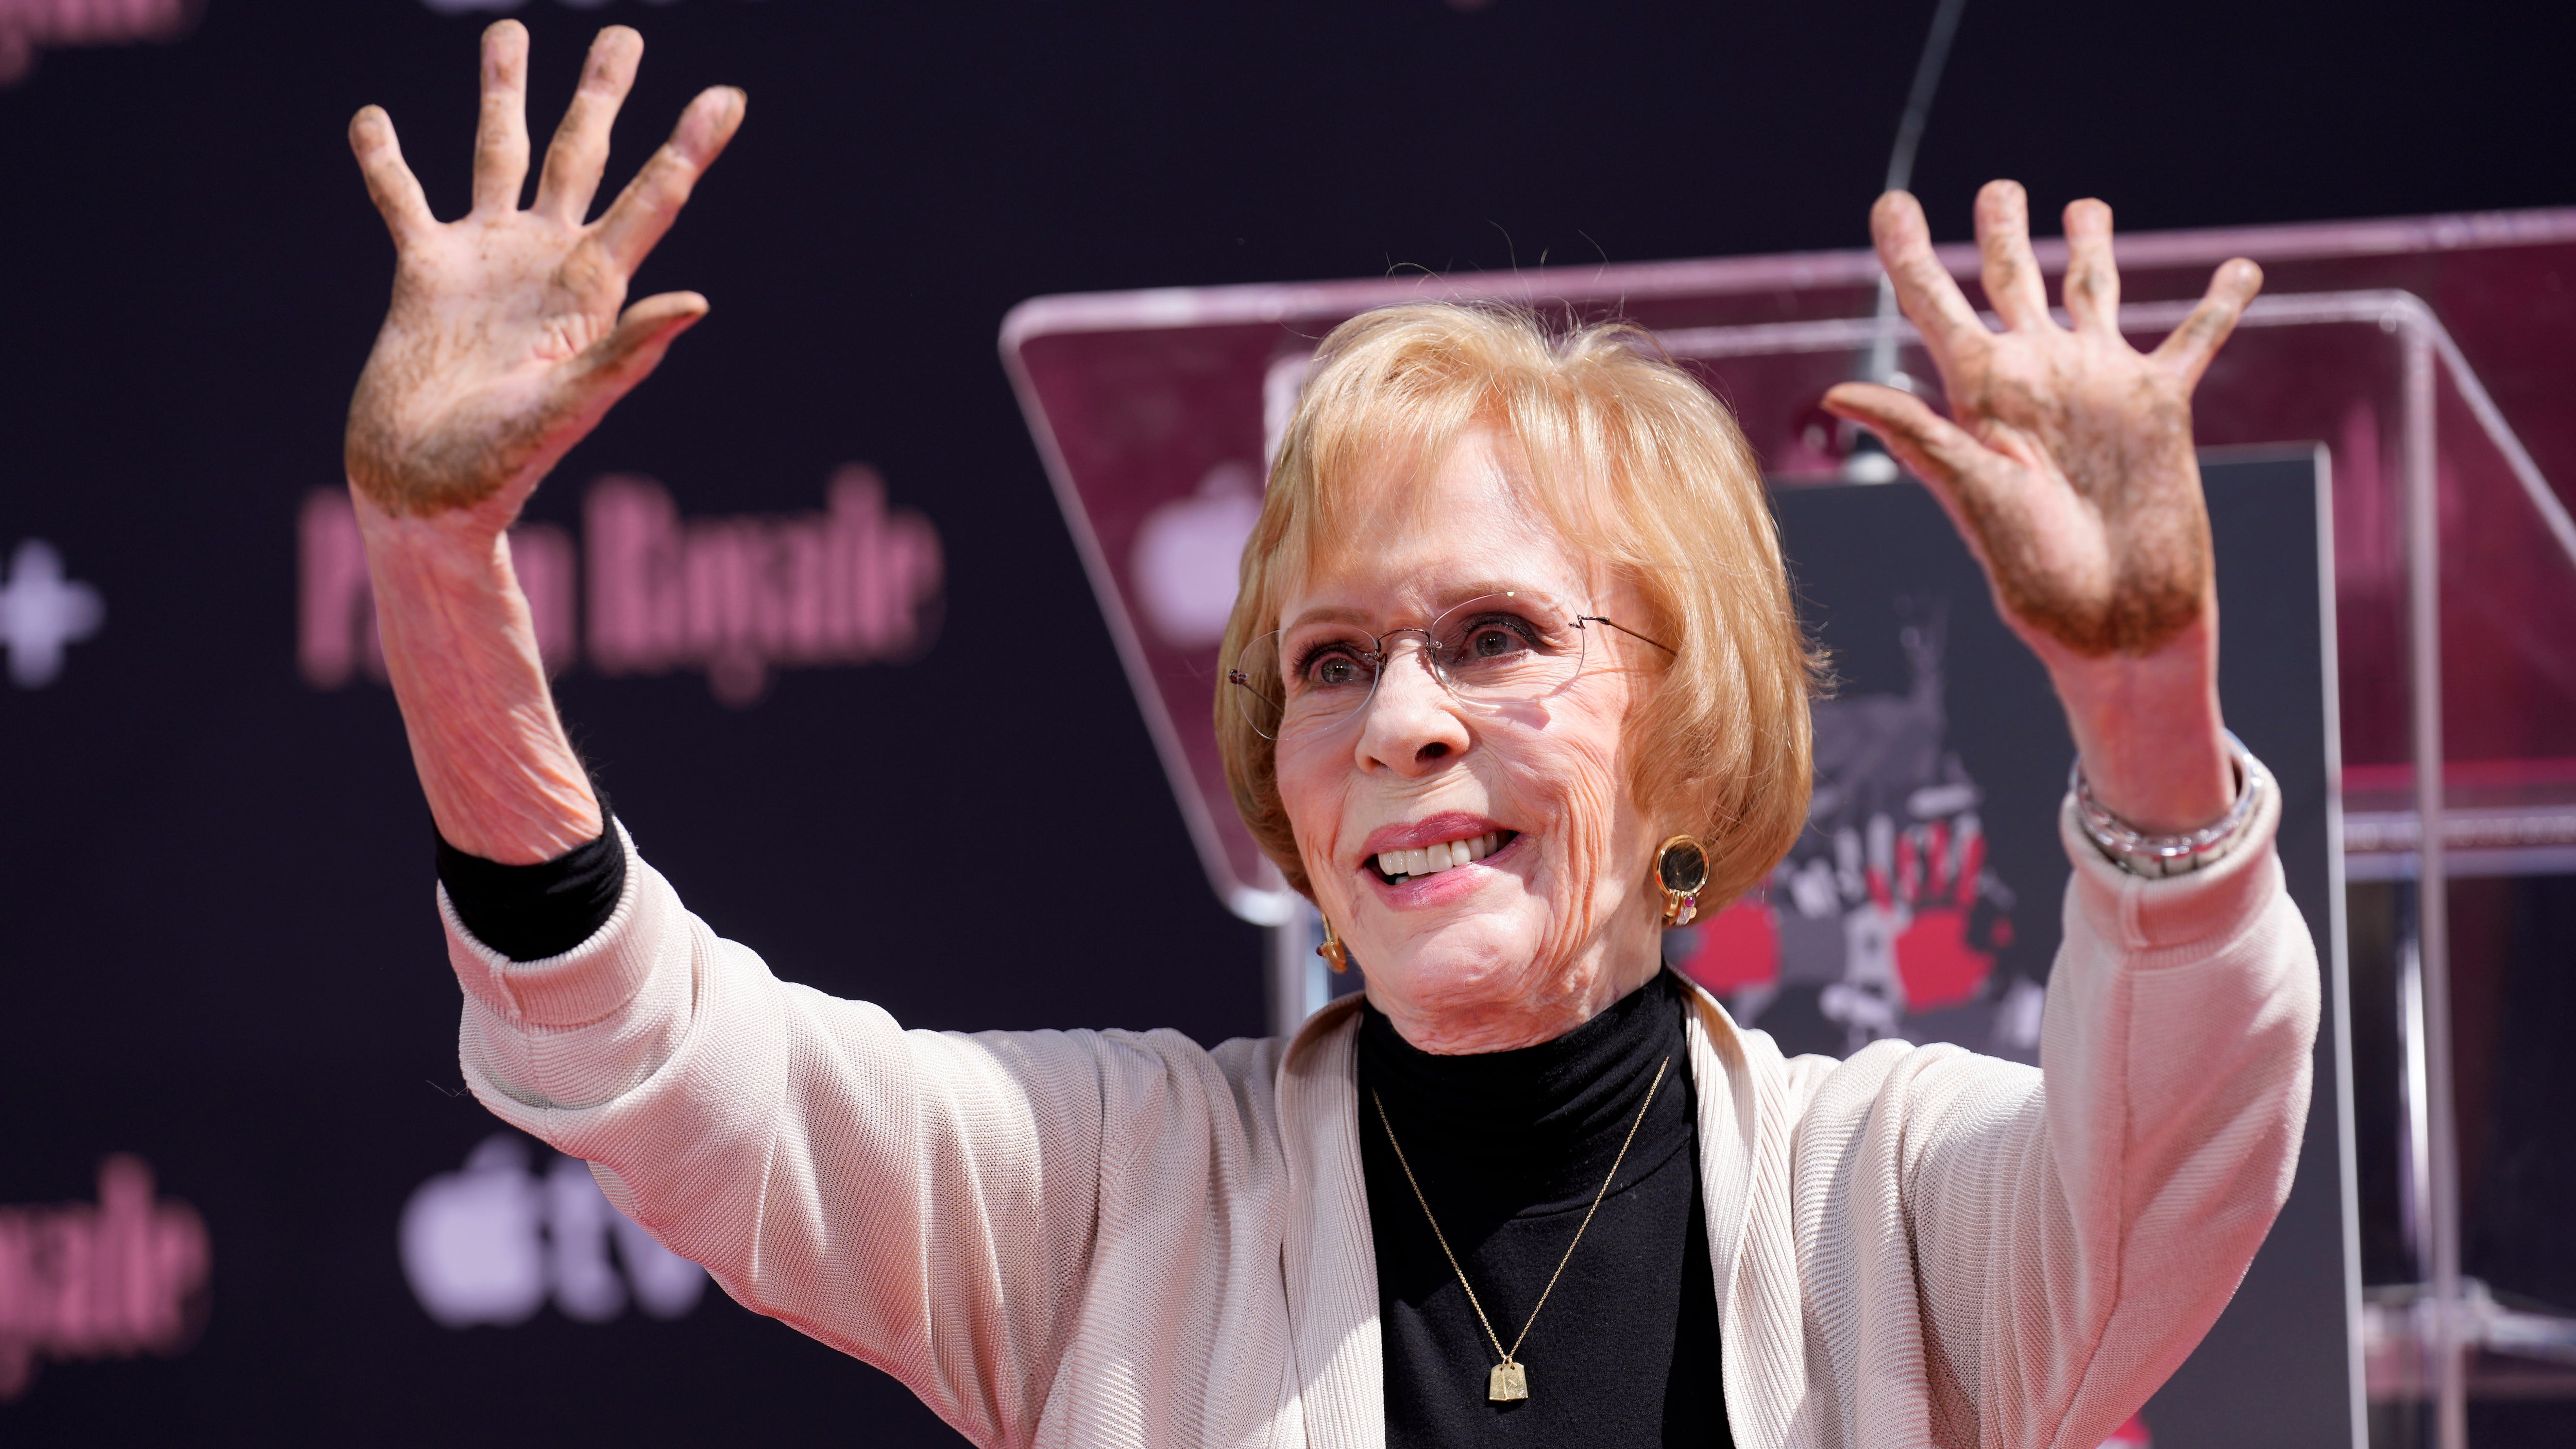 Comedian Carol Burnett holds up her hands after putting them in cement during a ceremony for her at the TCL Chinese Theatre AP Photo/Chris Pizzello)